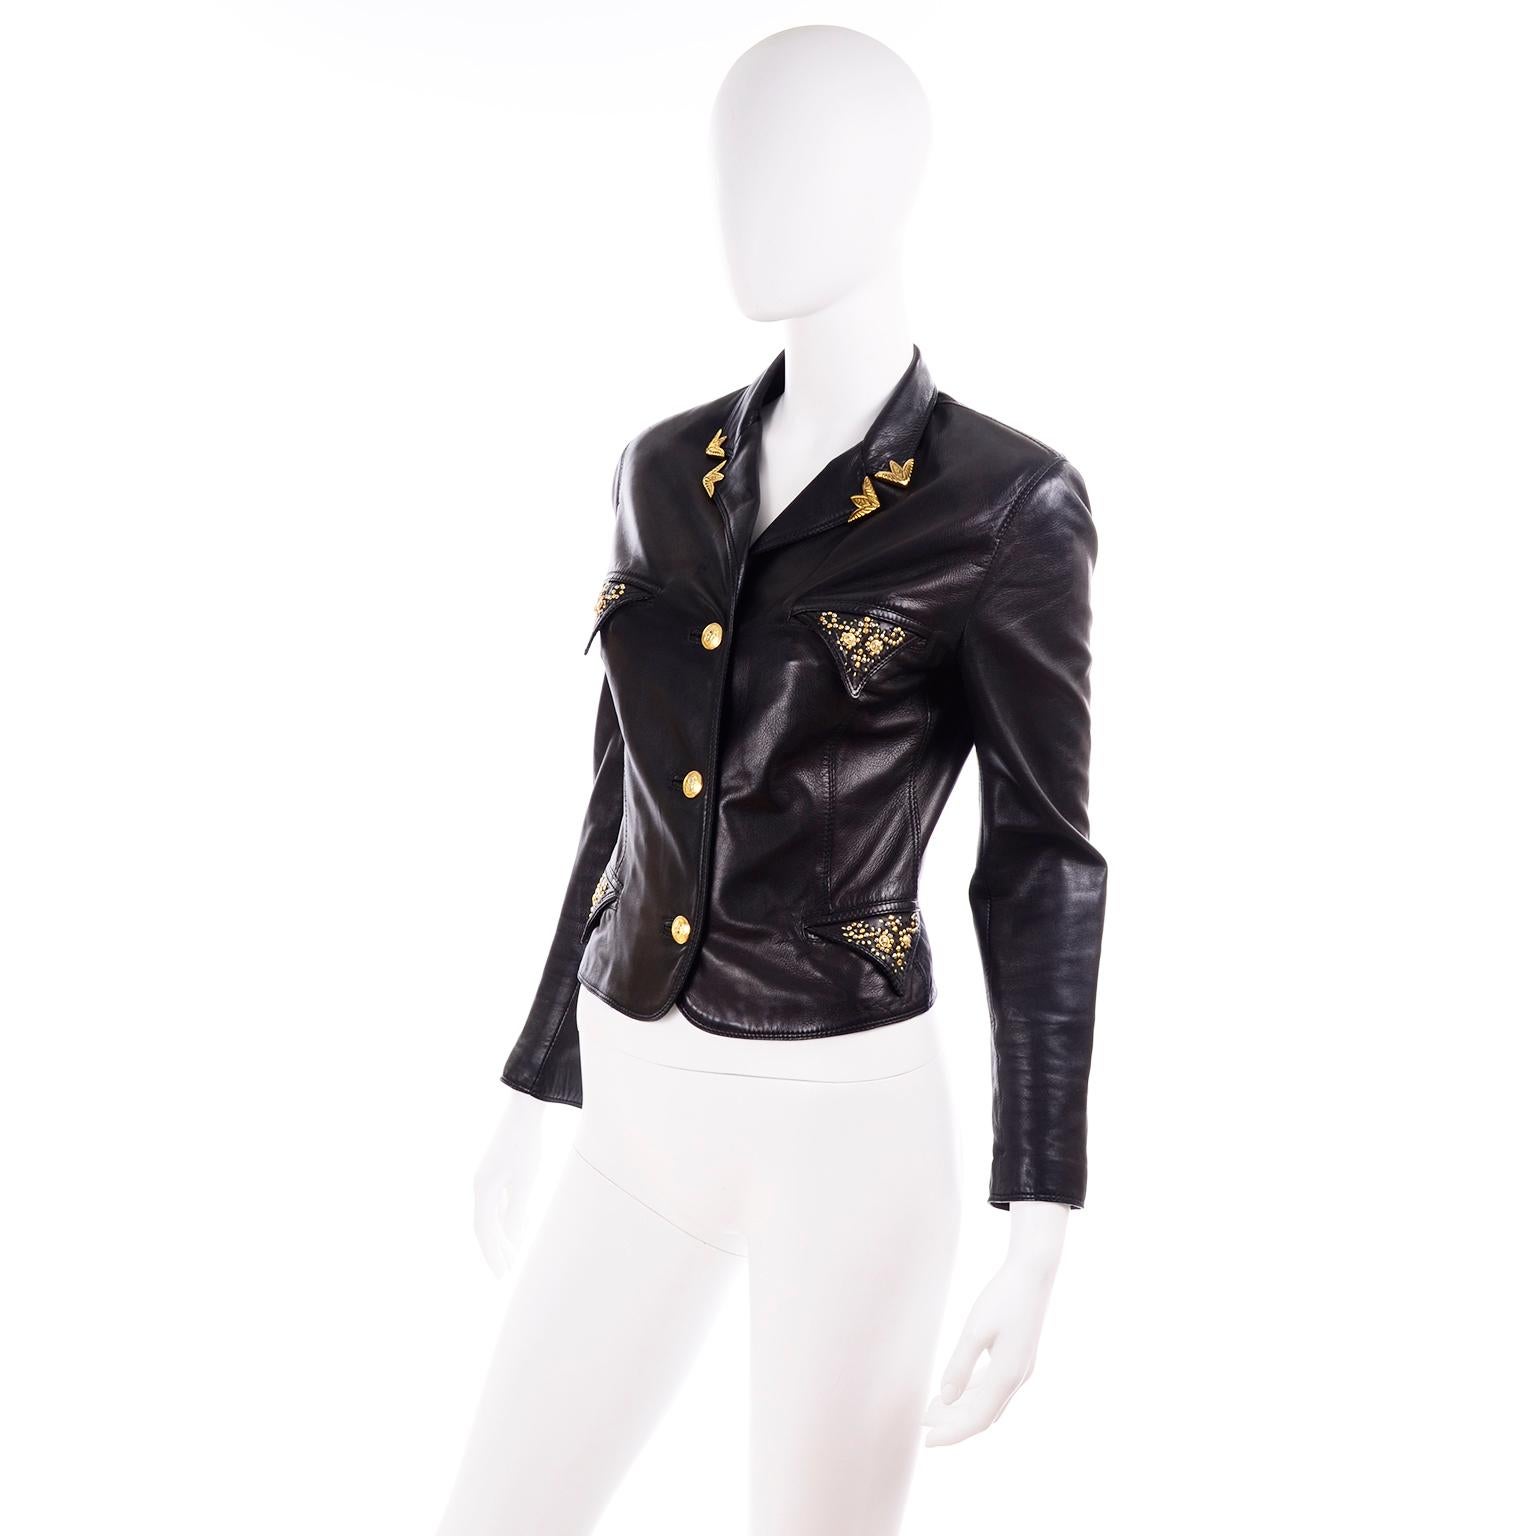 This vintage moto jacket was designed by Gianni Versace in the 1990's and features his signature leather elements including gold tone western style collar tips and studs. The jacket is a soft black lambskin leather and is fully lined. There are gold